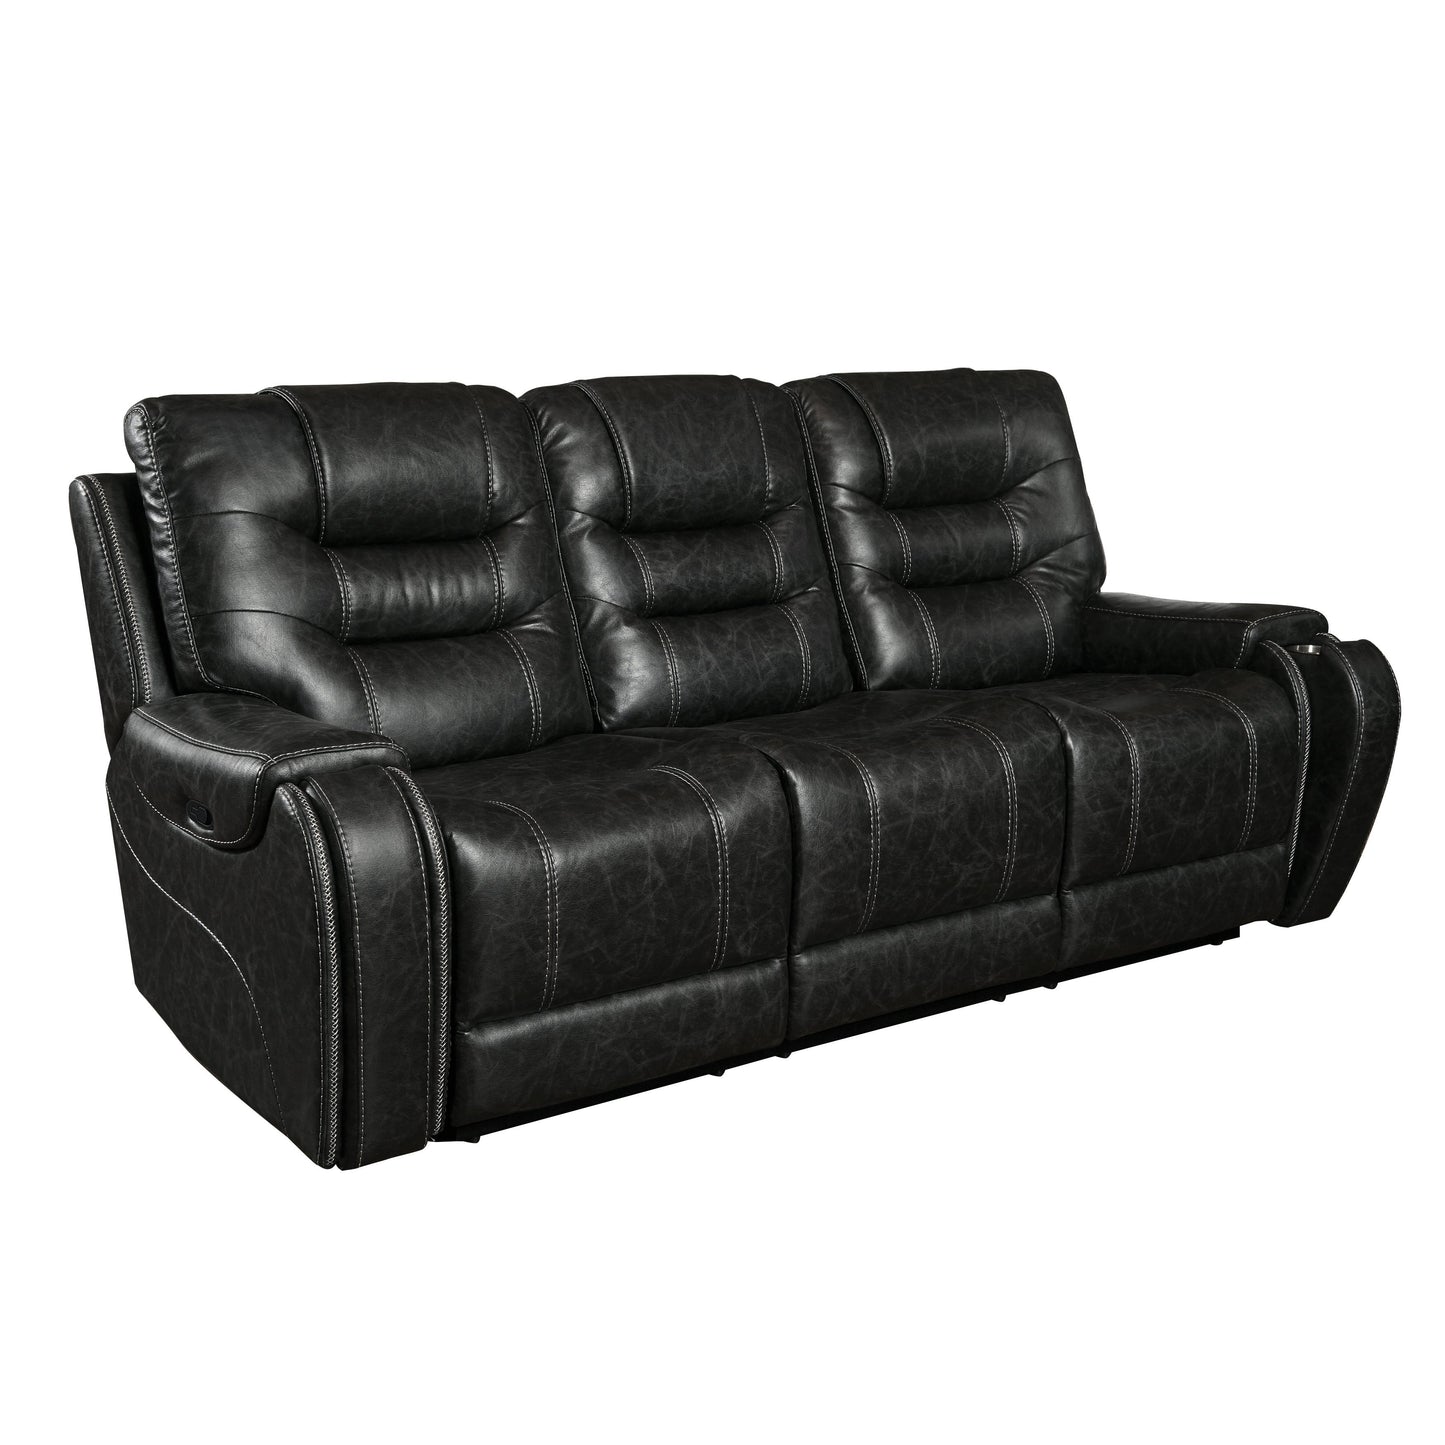 Rowena Contemporary Faux Leather Reclining Sofa with Cup Holder, Smoke